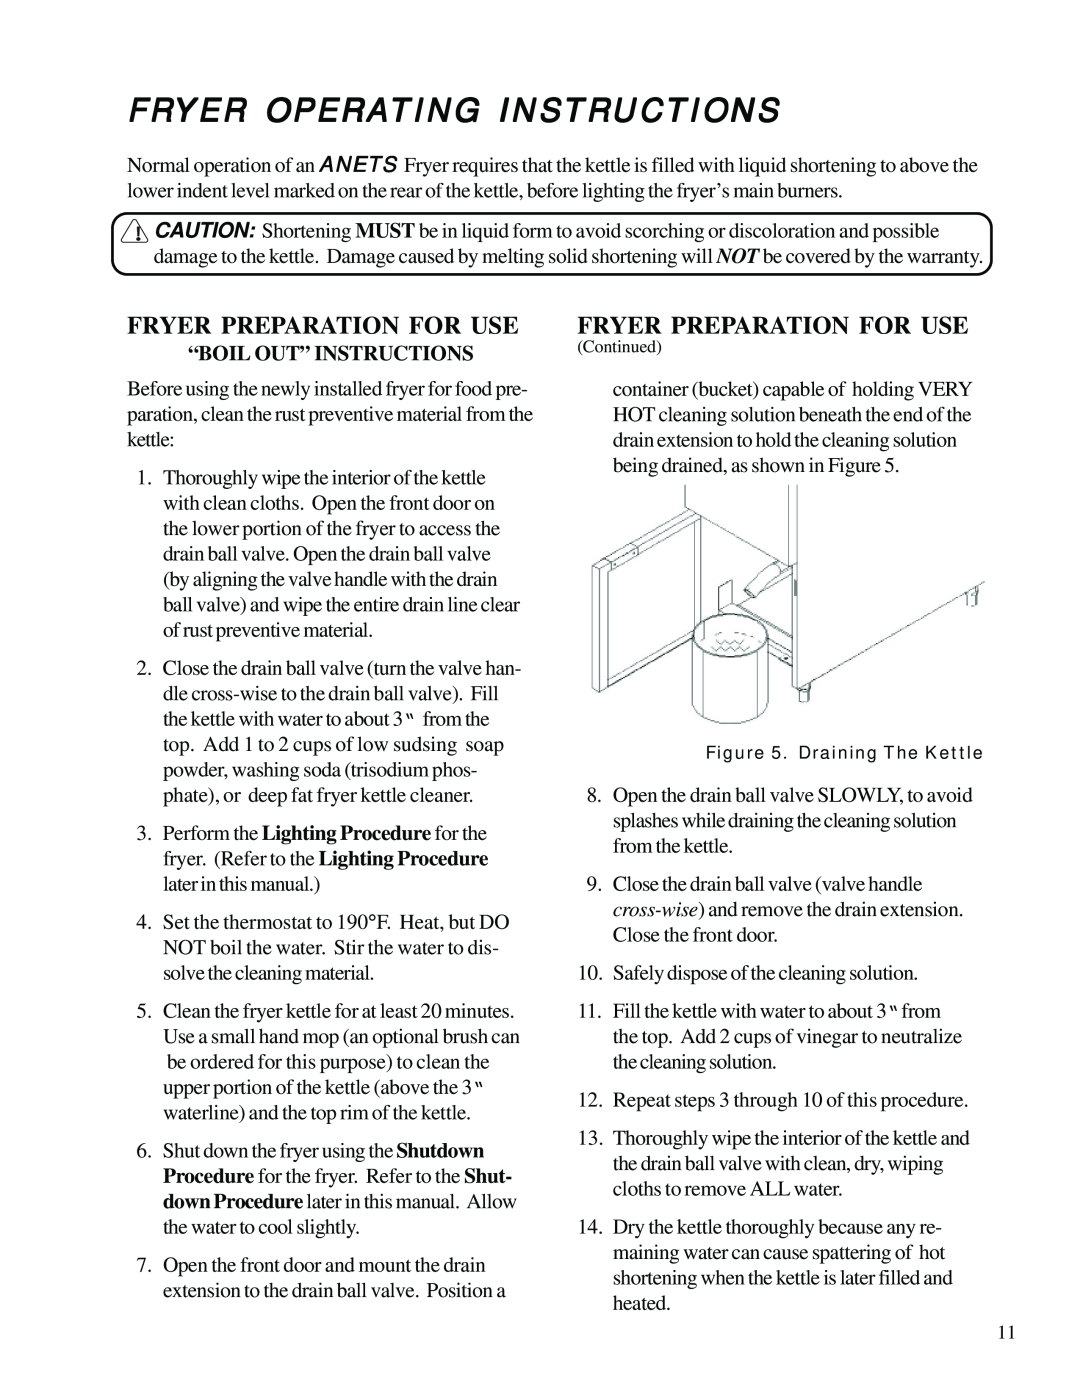 Anetsberger Brothers SLG40 warranty Fryer Operating Instructions, Fryer Preparation For Use, “Boil Out” Instructions 